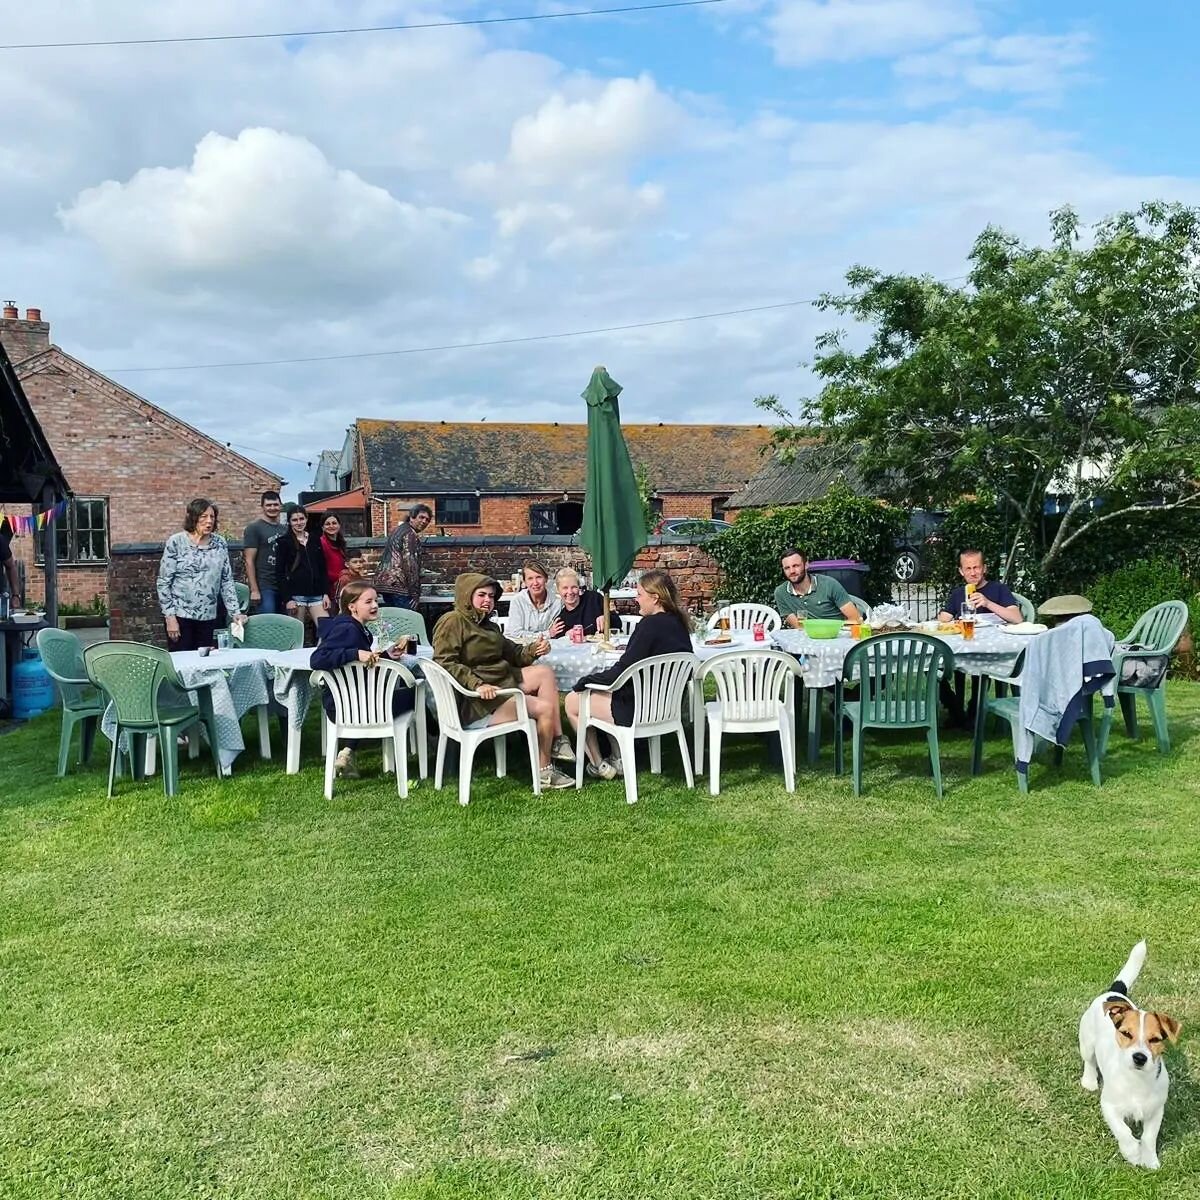 We couldn't do the work we do without the dedication of our team here at @shadeoakstud . 🐴
So back in June we celebrated during Racing Staff Week just to say a huge thank you to our fab team.🌟
Luckily the weather was fantastic and we had an enjoyab